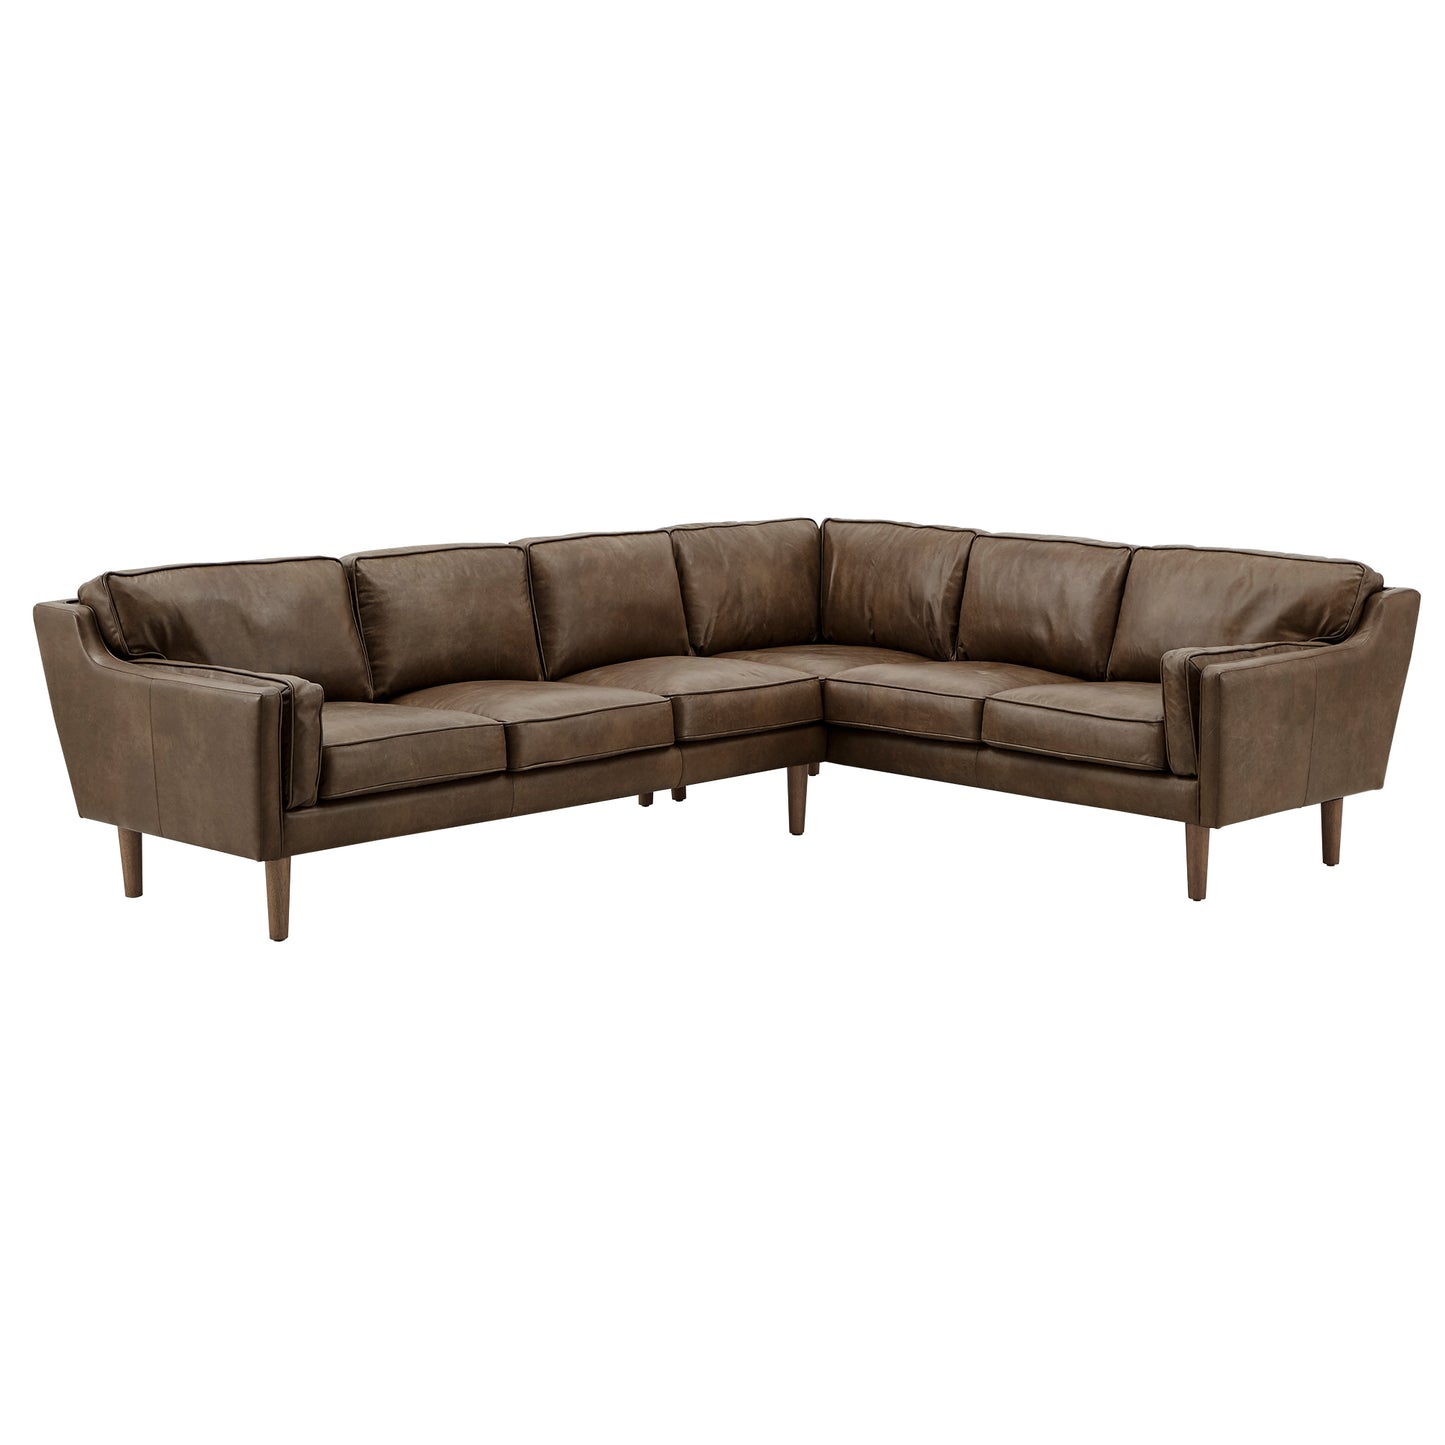 Oxford Leather Sectional Sofa - 6-Seat, 114" Wide, Tan